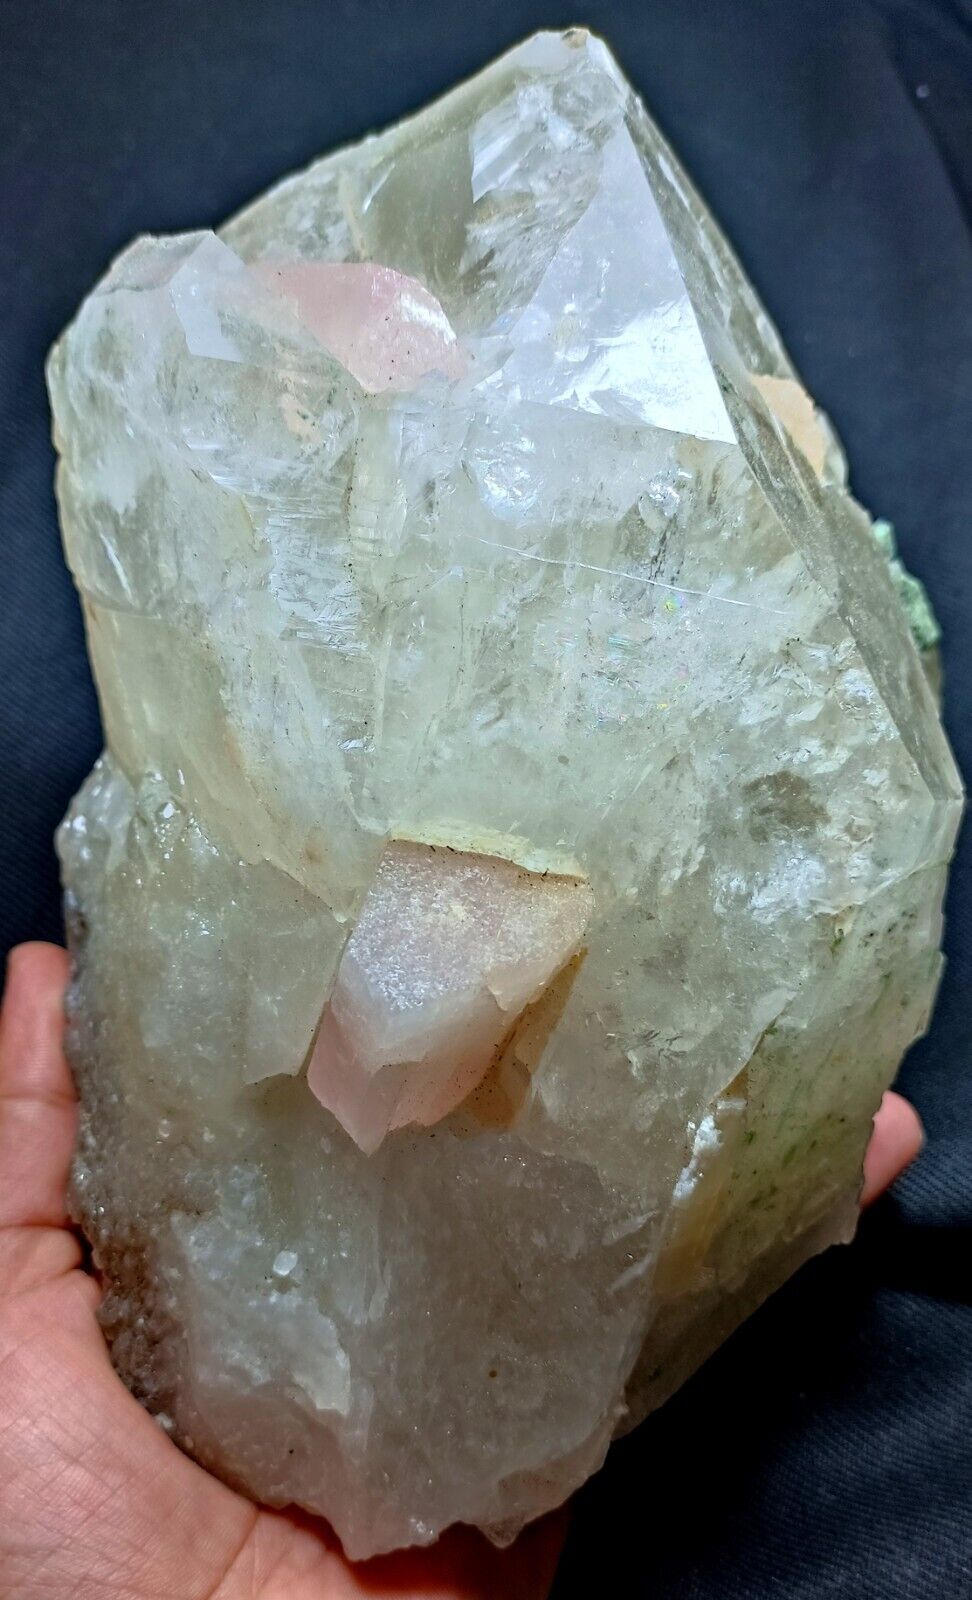 Huge size Smoky Quartz Combine with two Pink Kunzite Crystals & Green Tourmaline